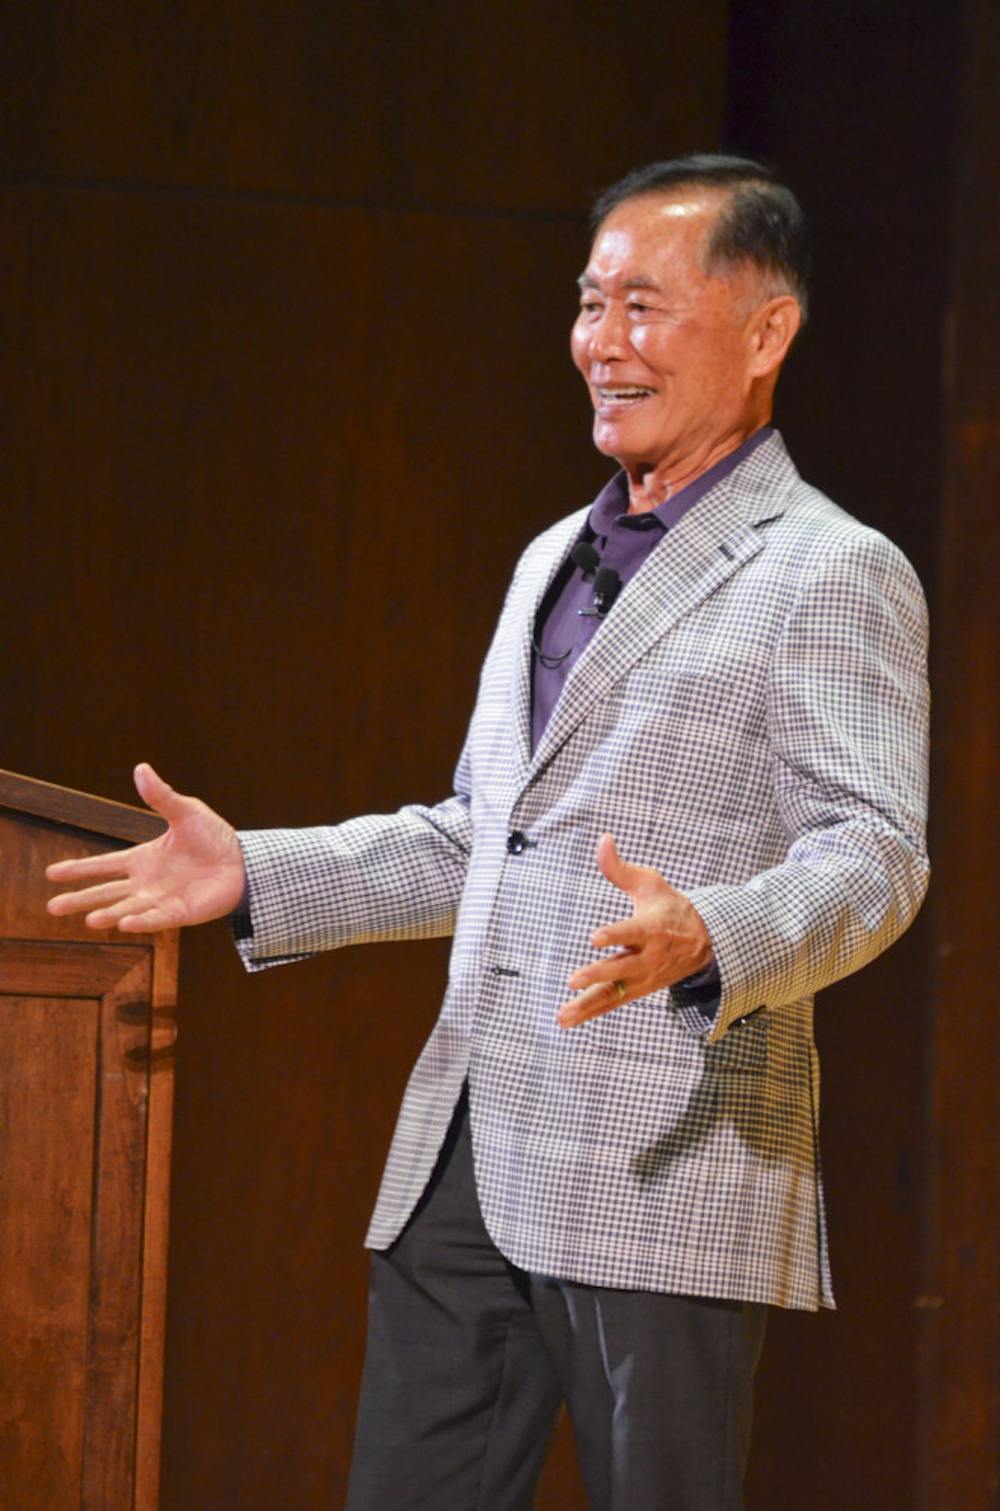 <p class="p1">Actor and activist George Takei speaks at the University Auditorium on Tuesday night as part of the Accent Speaker’s Bureau series.</p>